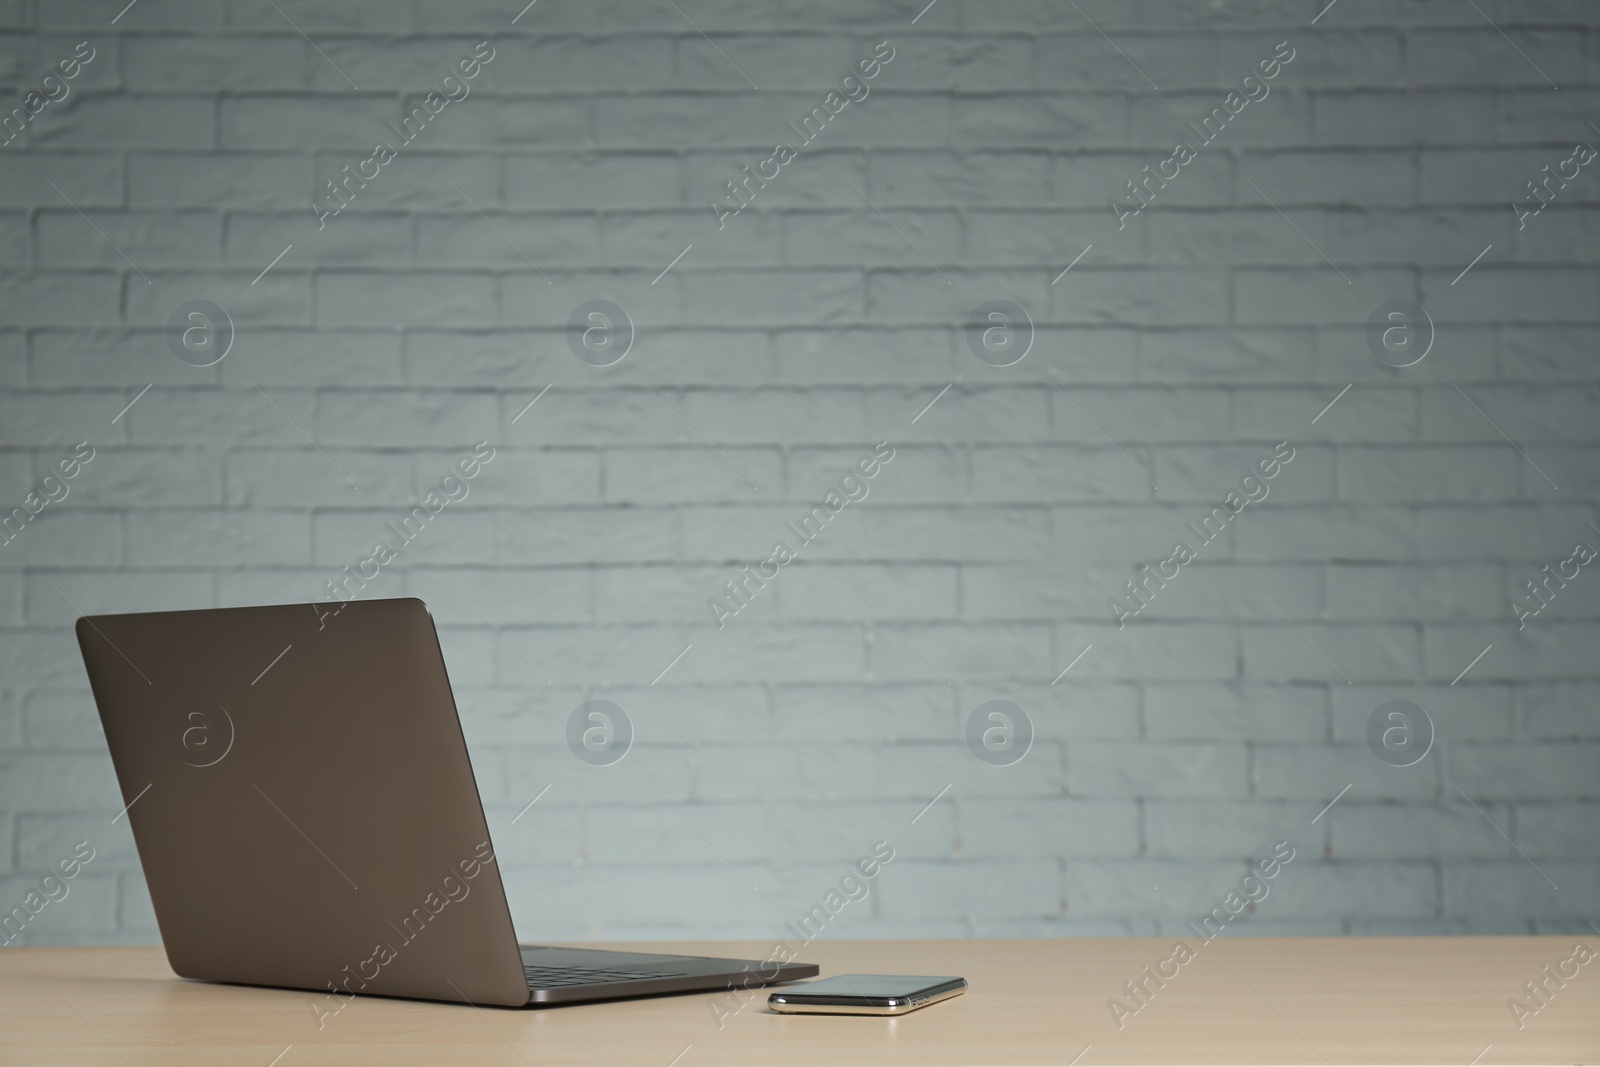 Photo of Modern laptop and mobile phone on table against brick wall